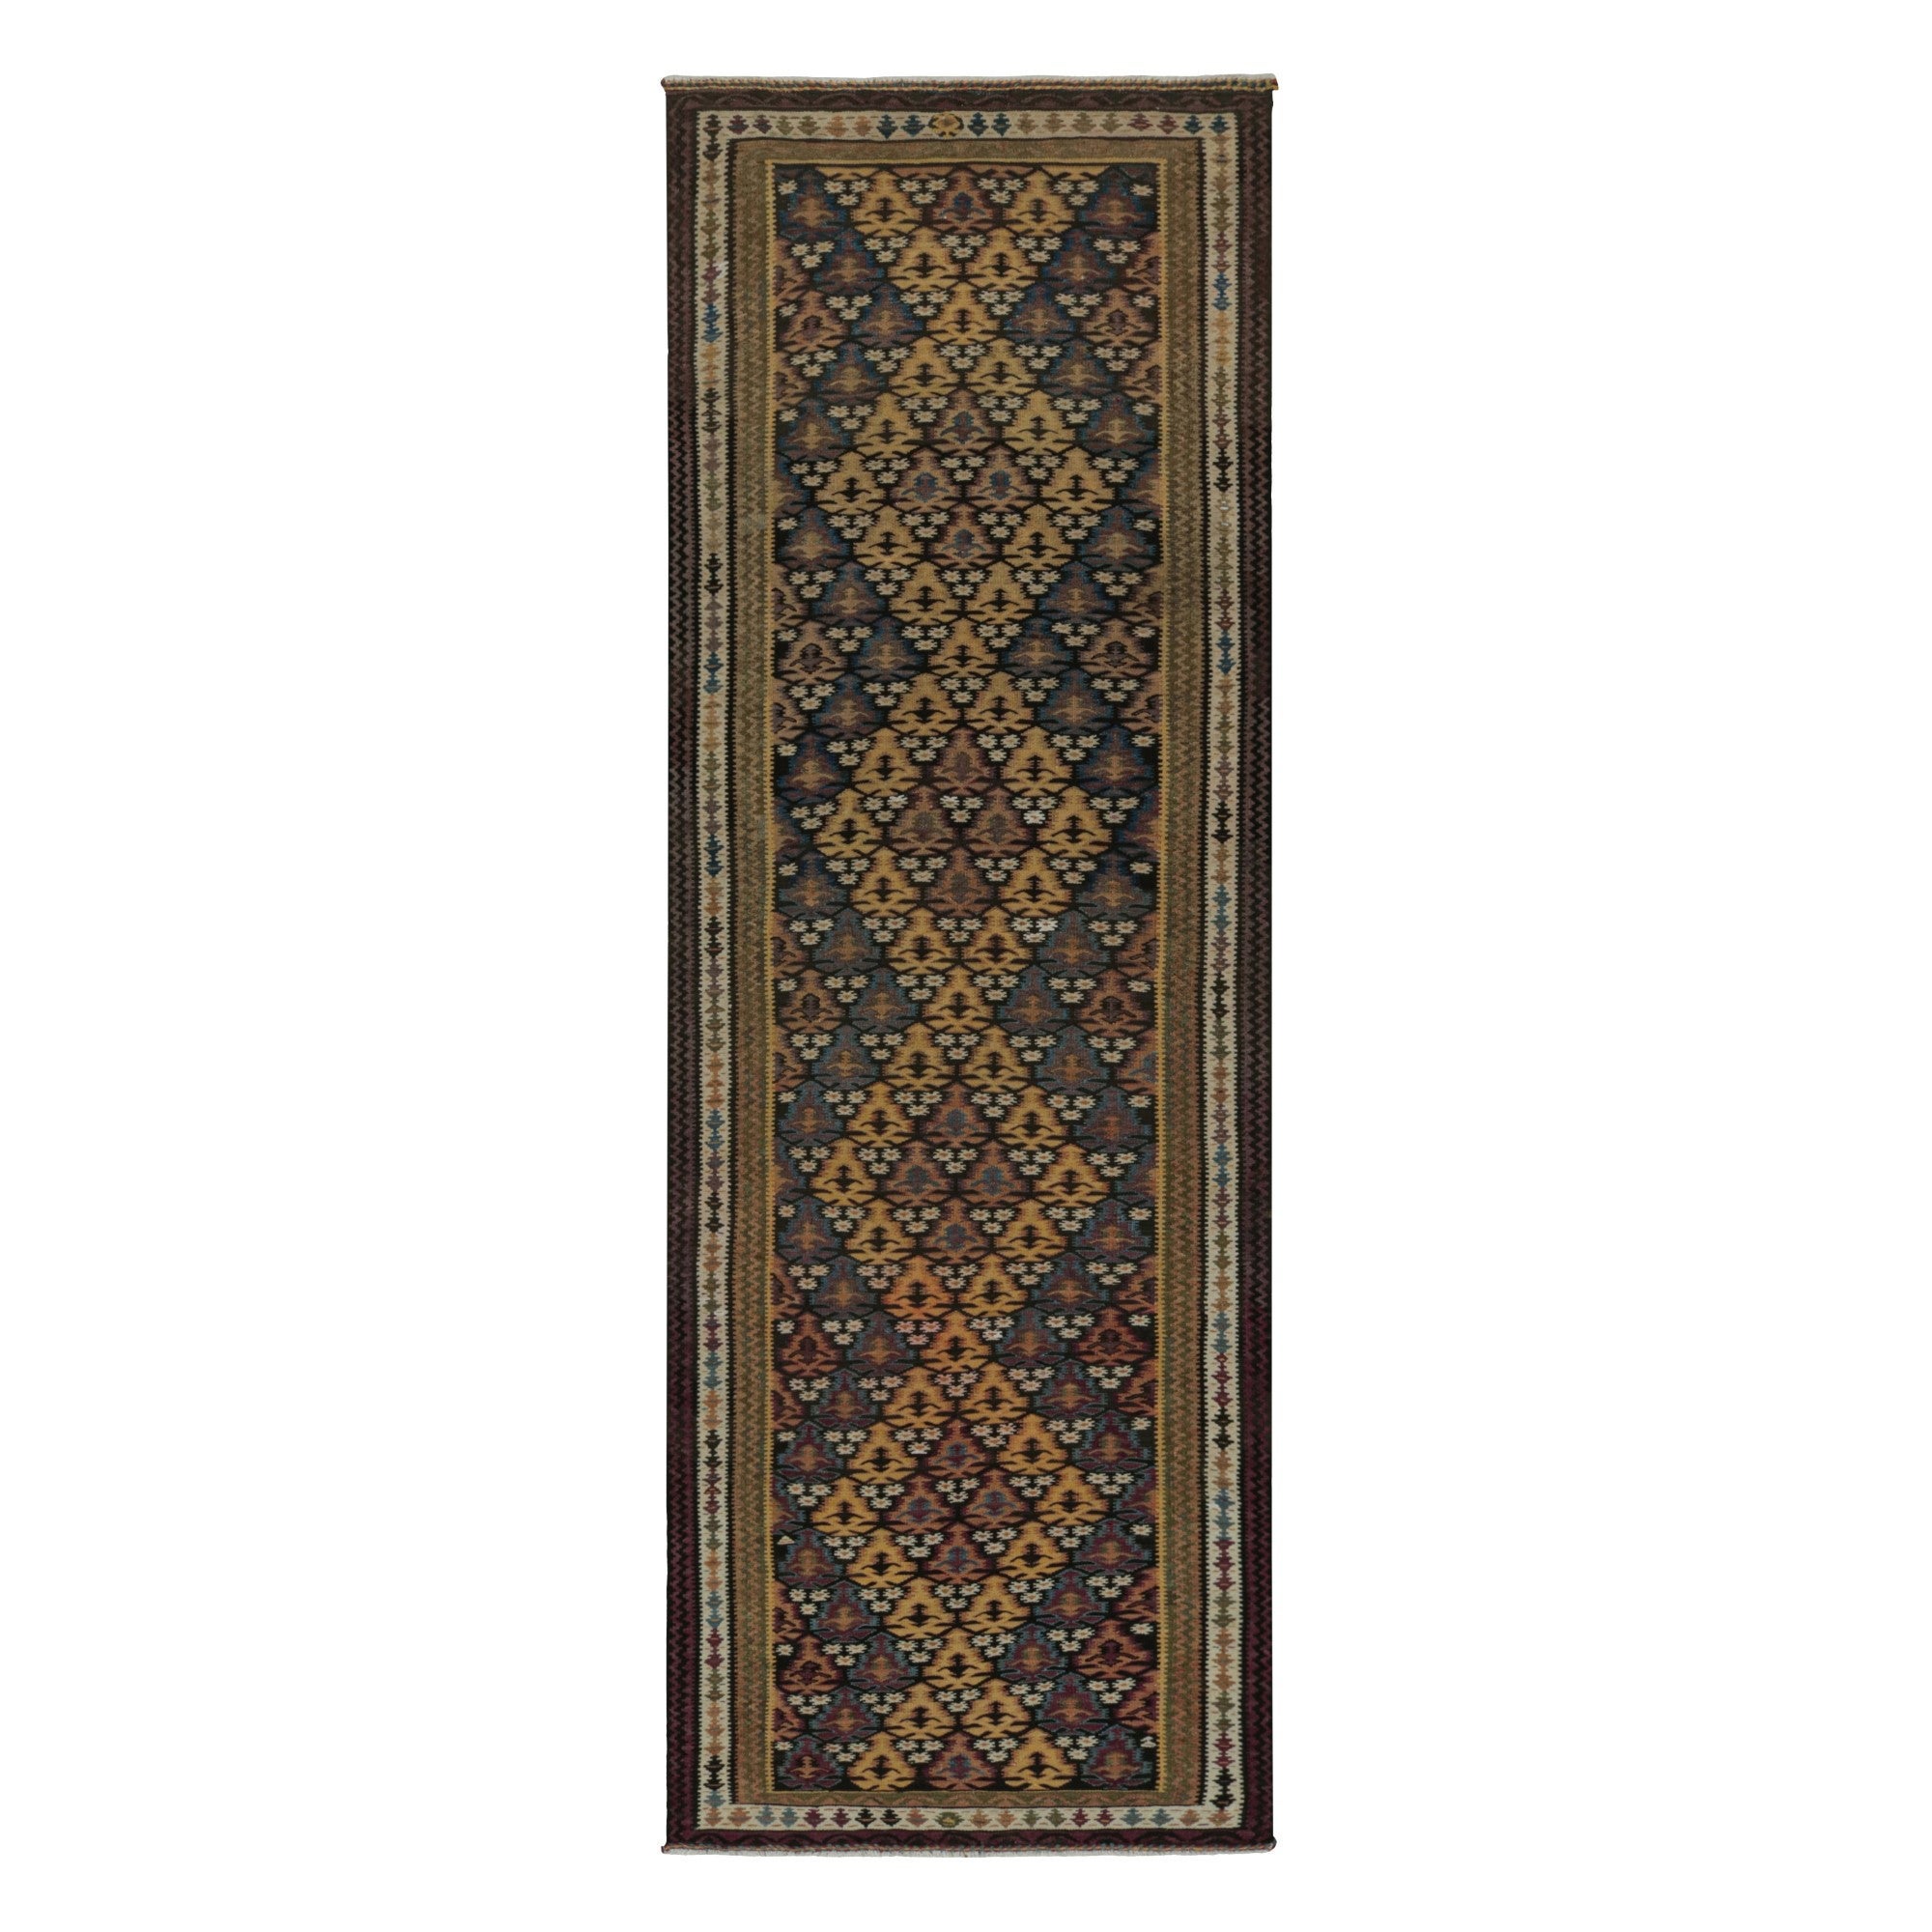 Vintage Tribal Kilim runner rug with Polychromatic Patterns by Rug & Kilim For Sale